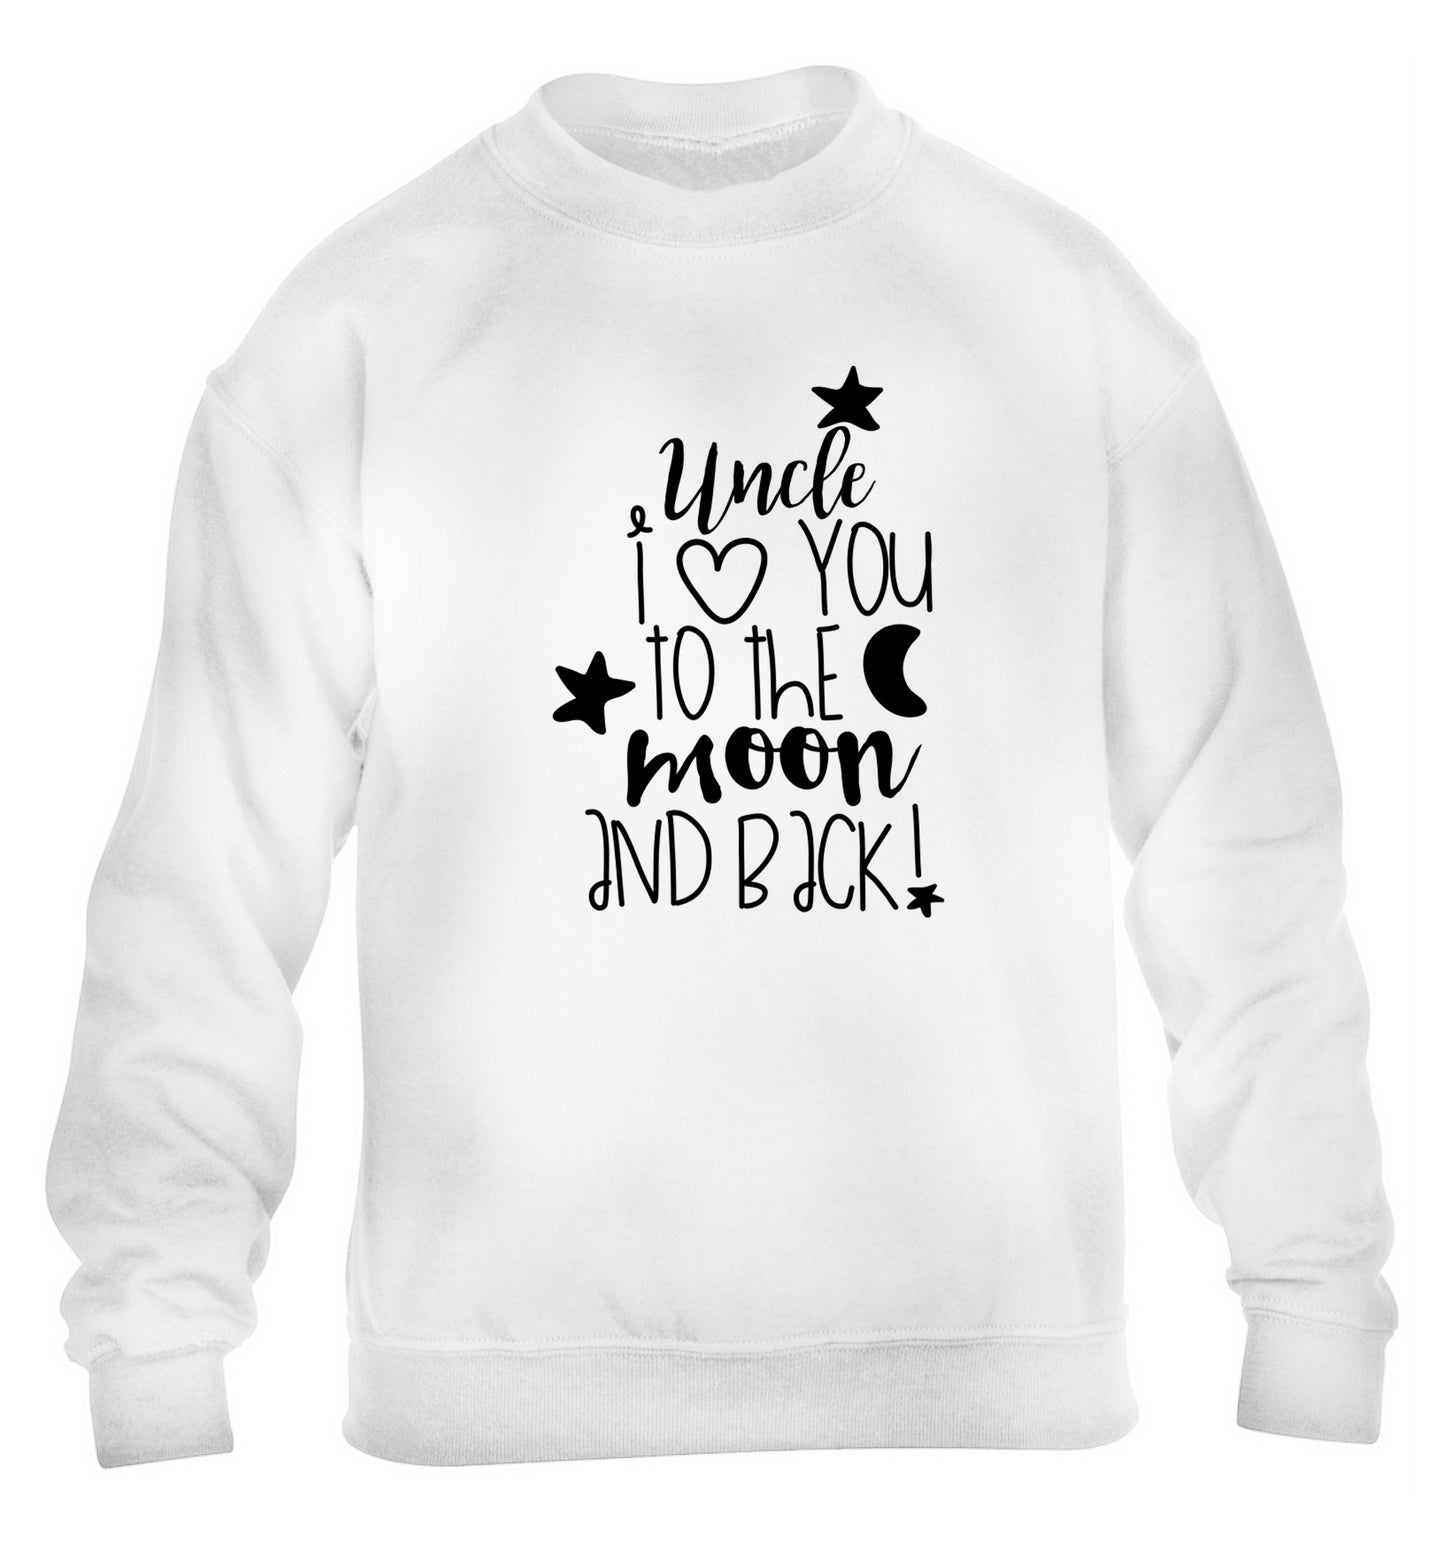 Uncle I love you to the moon and back children's white  sweater 12-14 Years